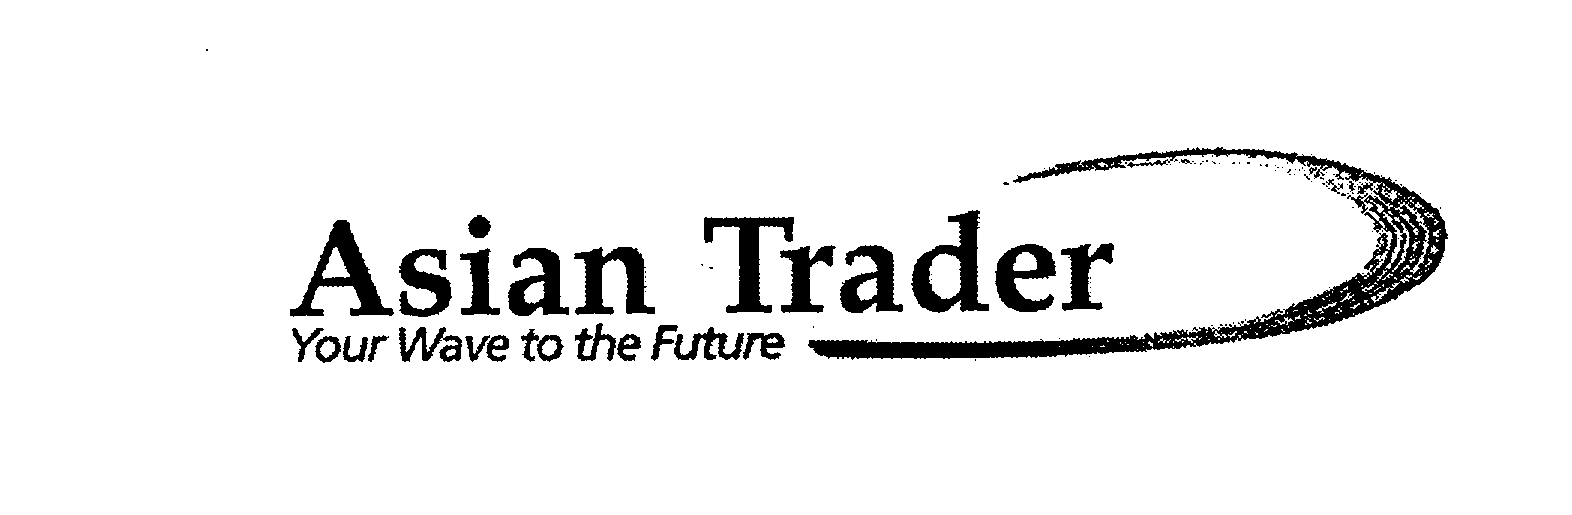  ASIAN TRADER YOUR WAVE TO THE FUTURE